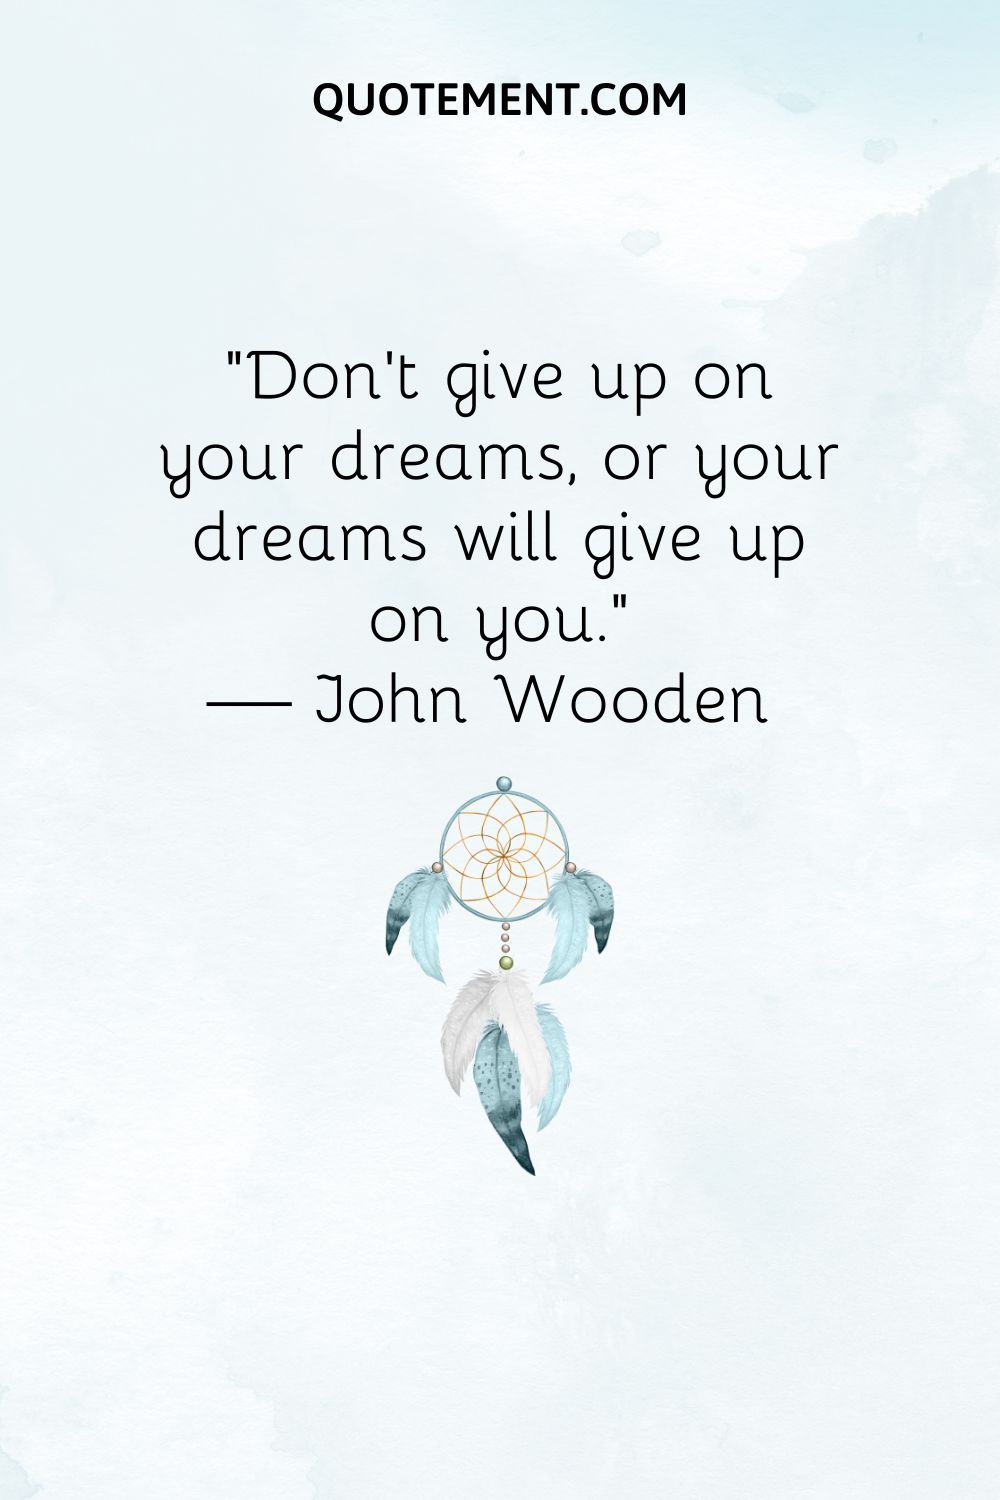 “Don’t give up on your dreams, or your dreams will give up on you.” — John Wooden